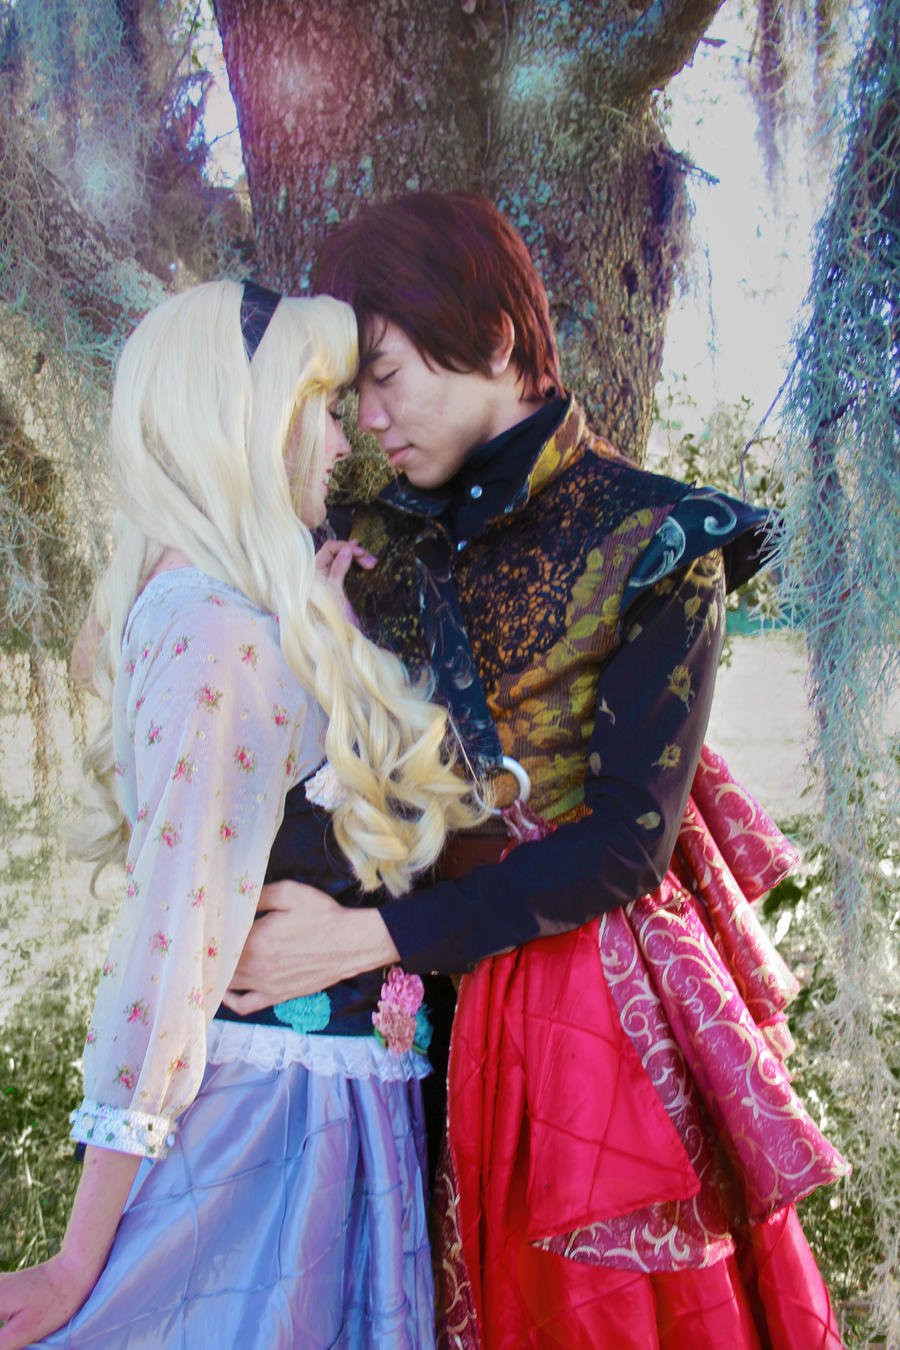 Prince Phillip and Briar Rose Cosplay